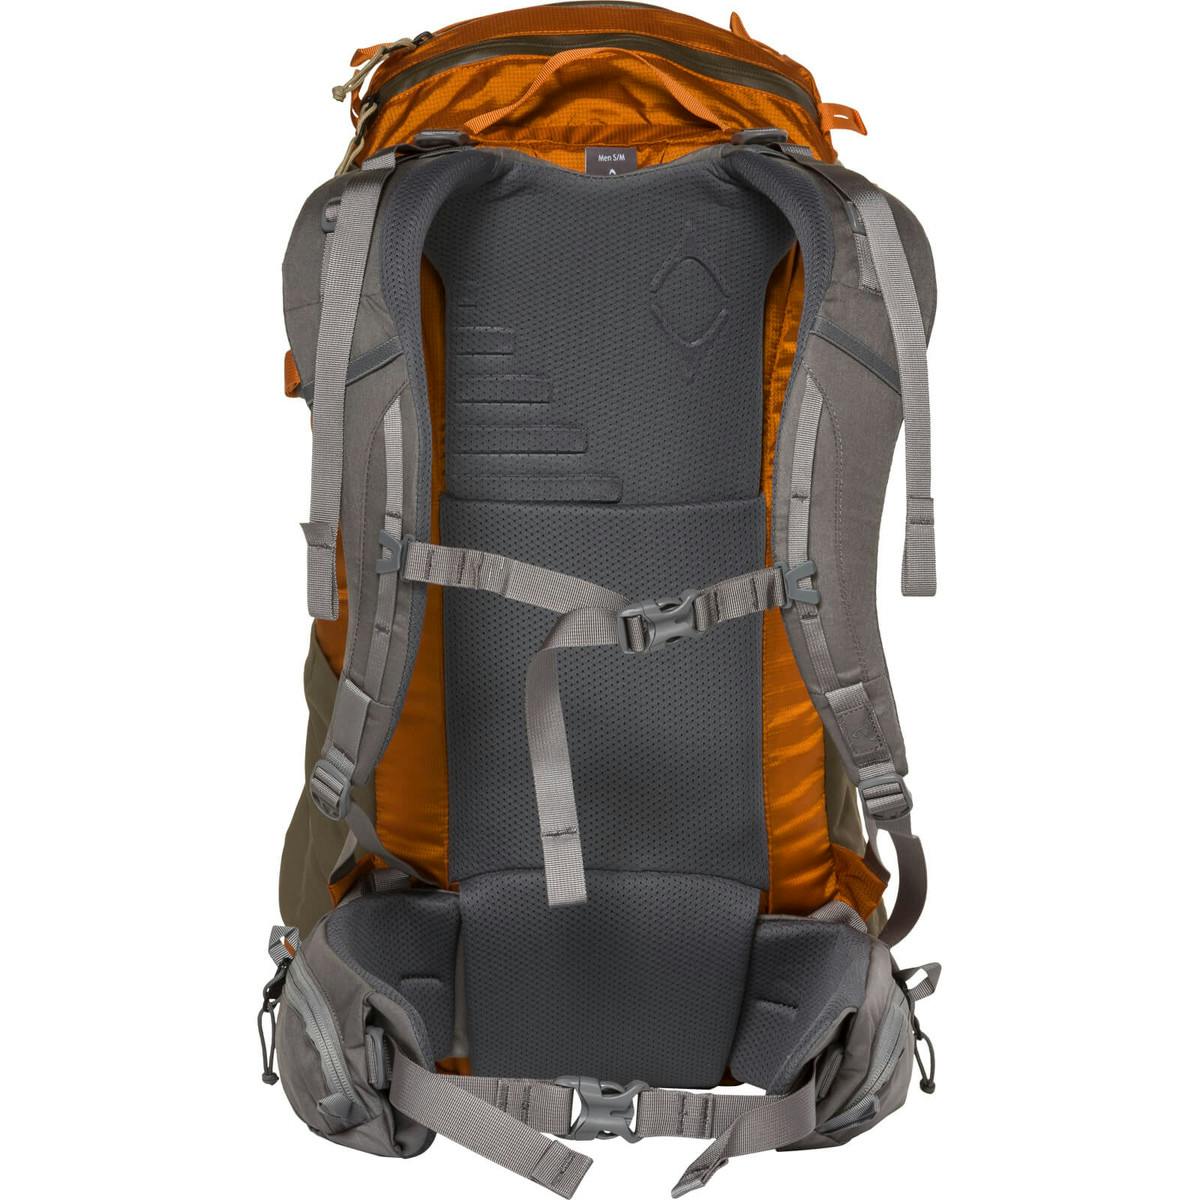 Mystery Ranch Scree 32 Backpack- Men's